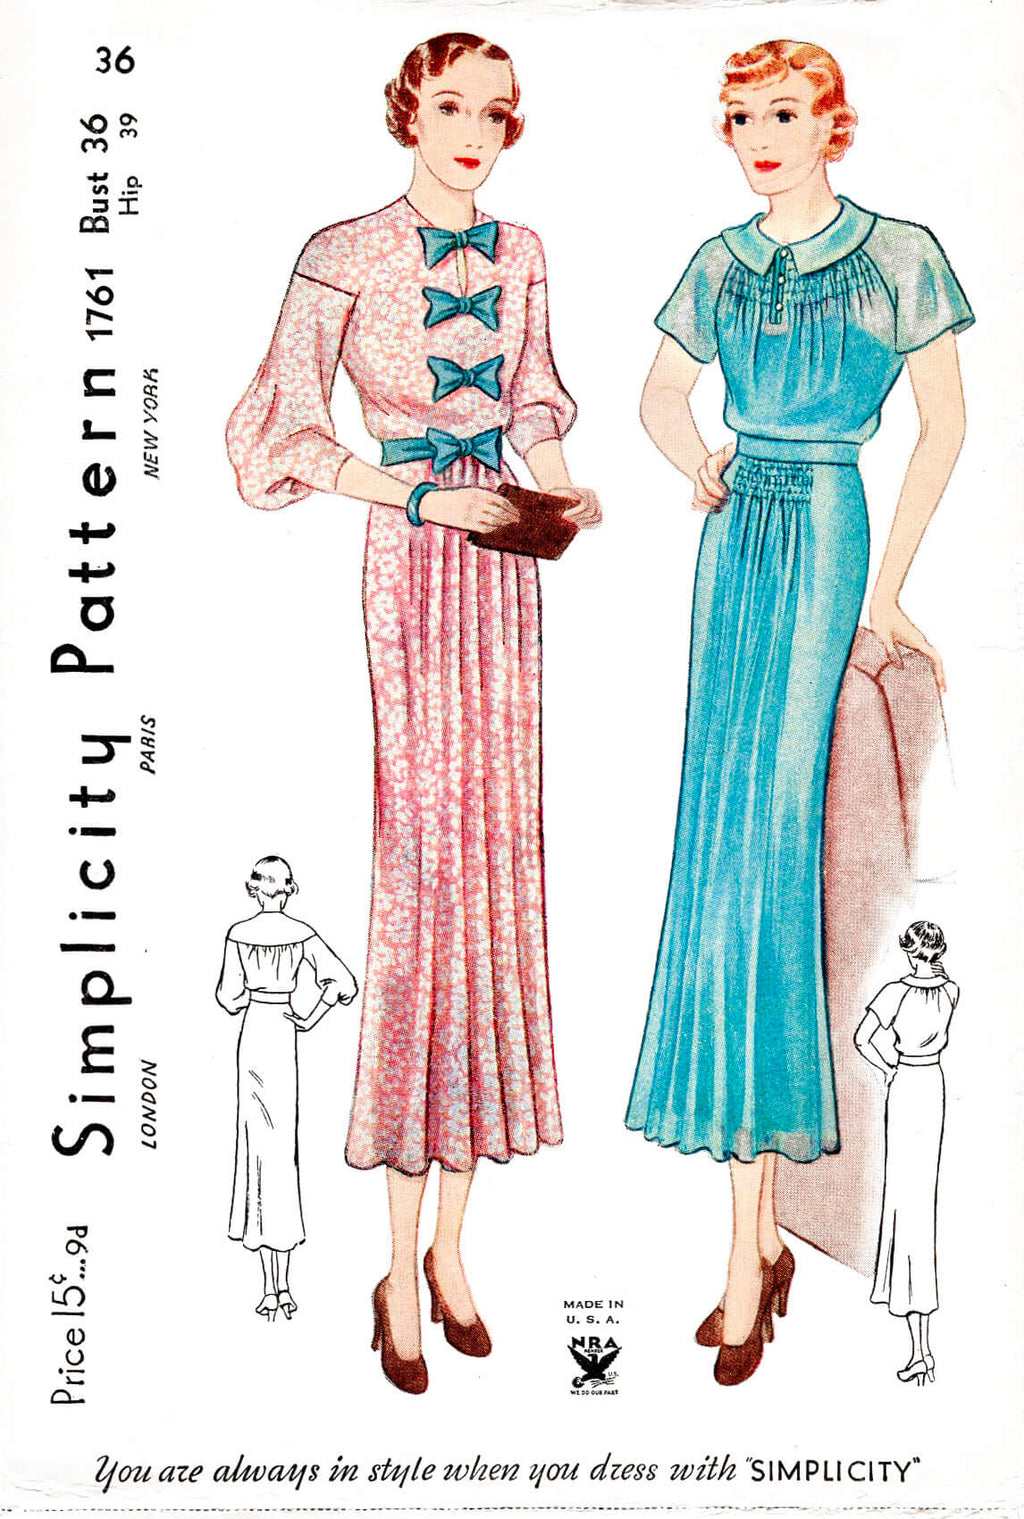 1920s 1930s dress vintage sewing pattern reproduction – Lady Marlowe